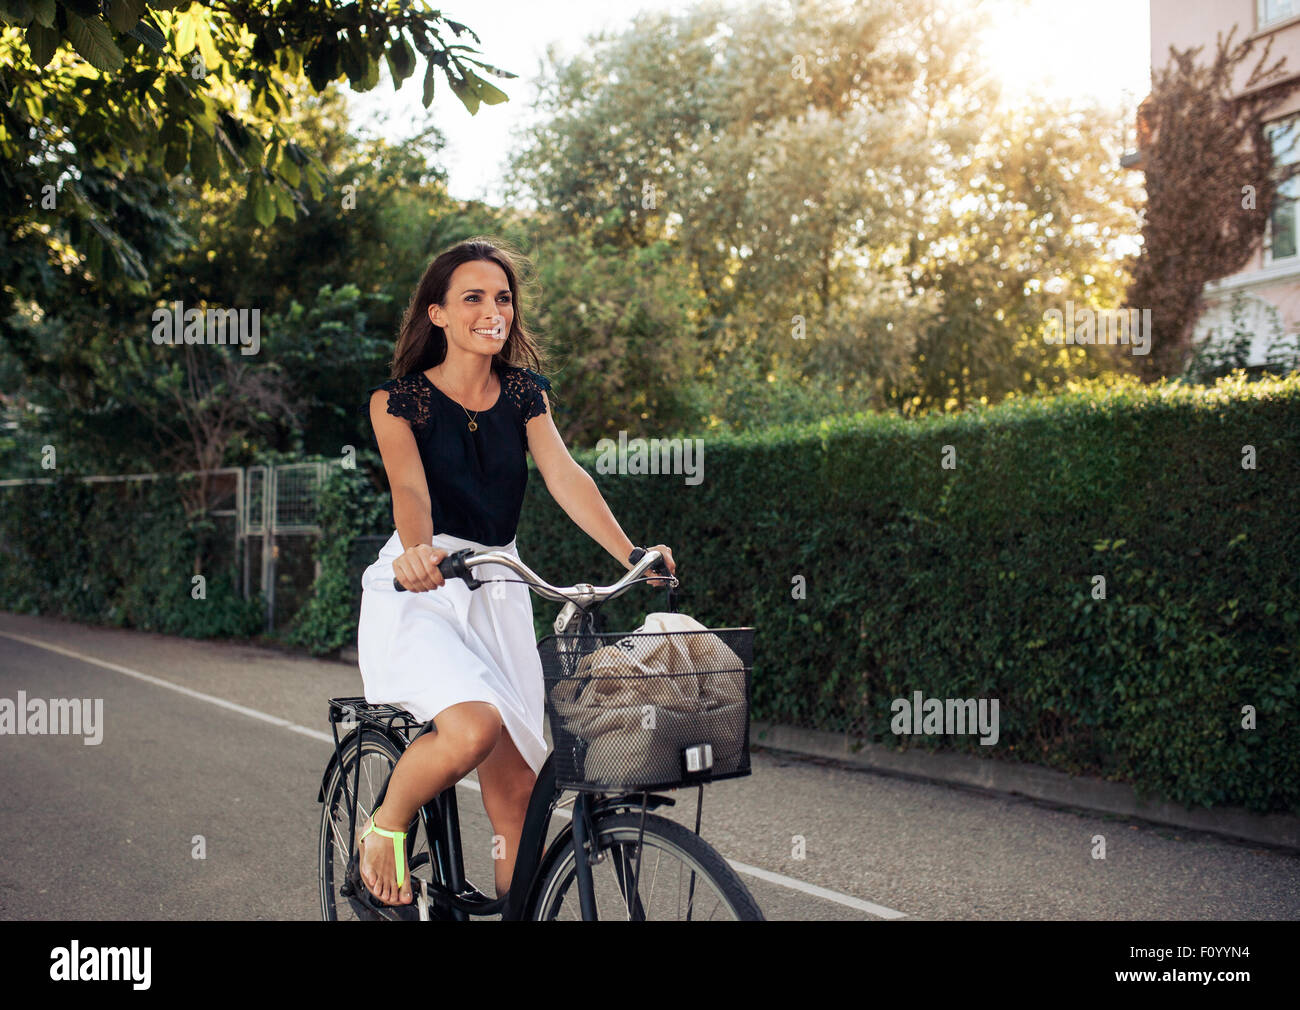 Portrait of a beautiful young woman cycling along street. Smiling woman riding her bicycle on city street. Stock Photo